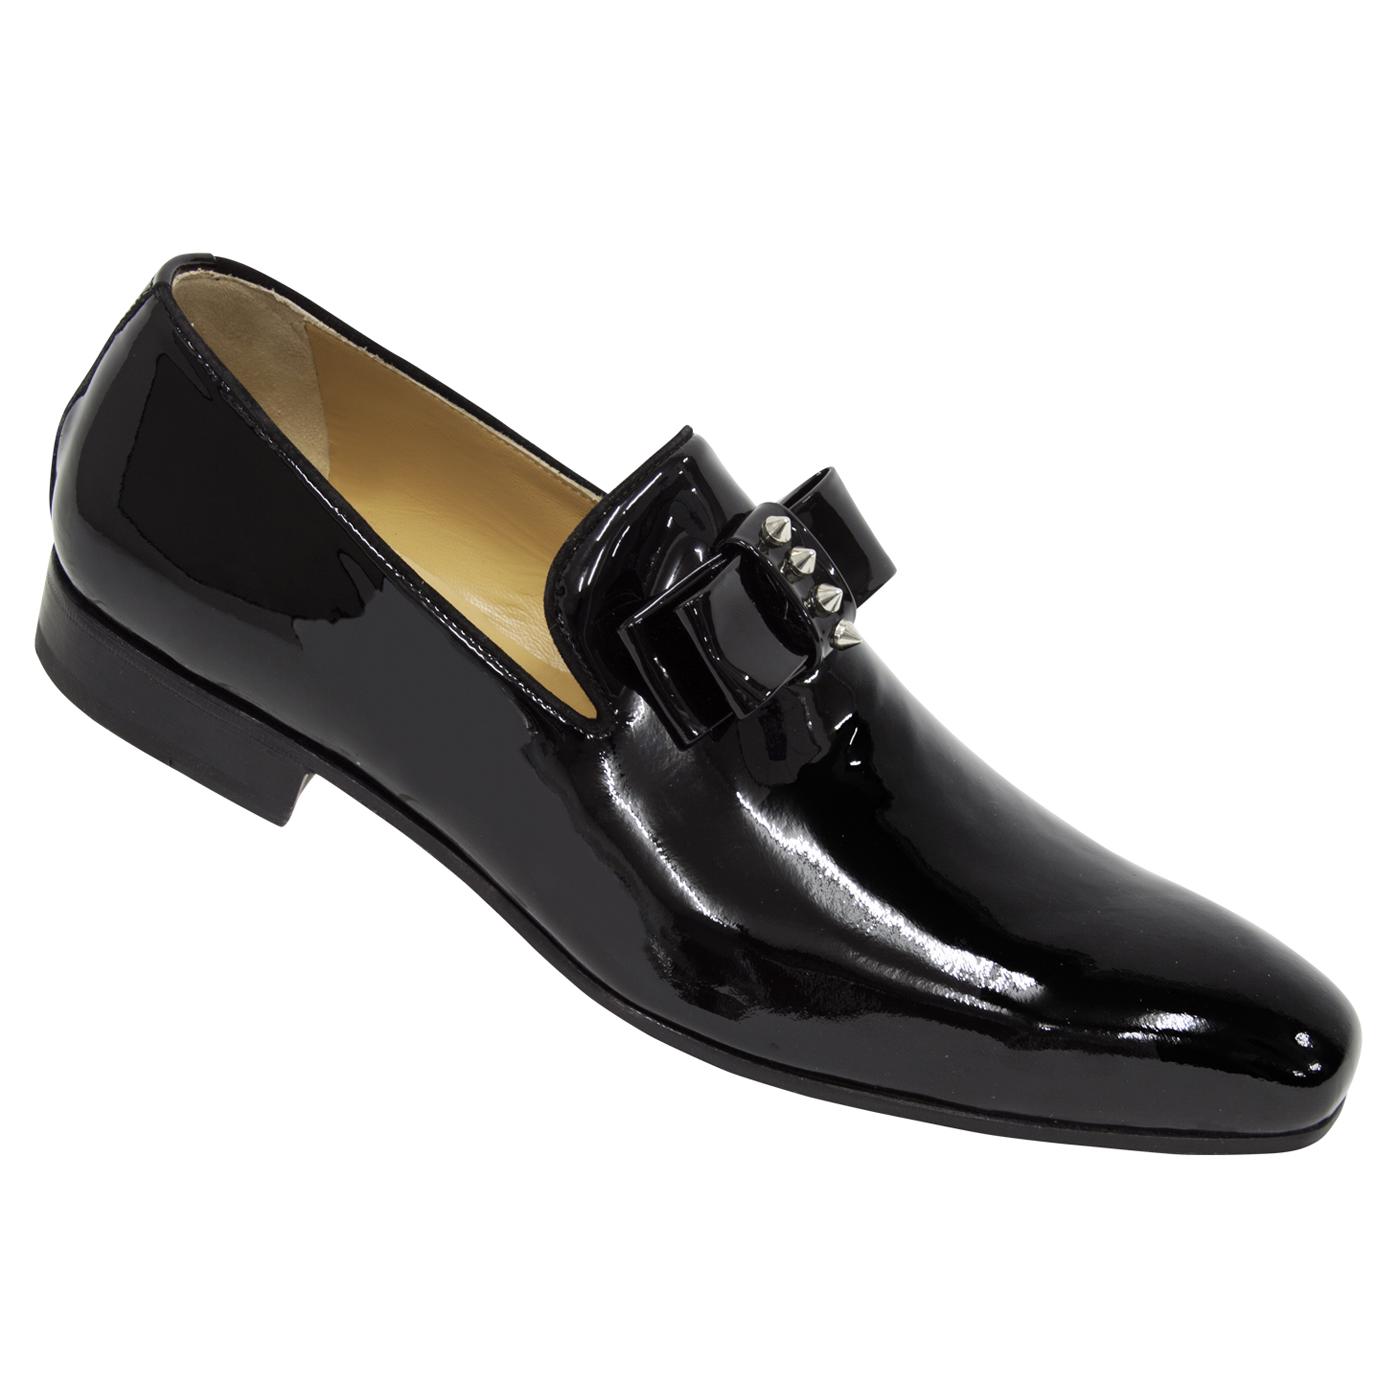 patent leather evening shoes